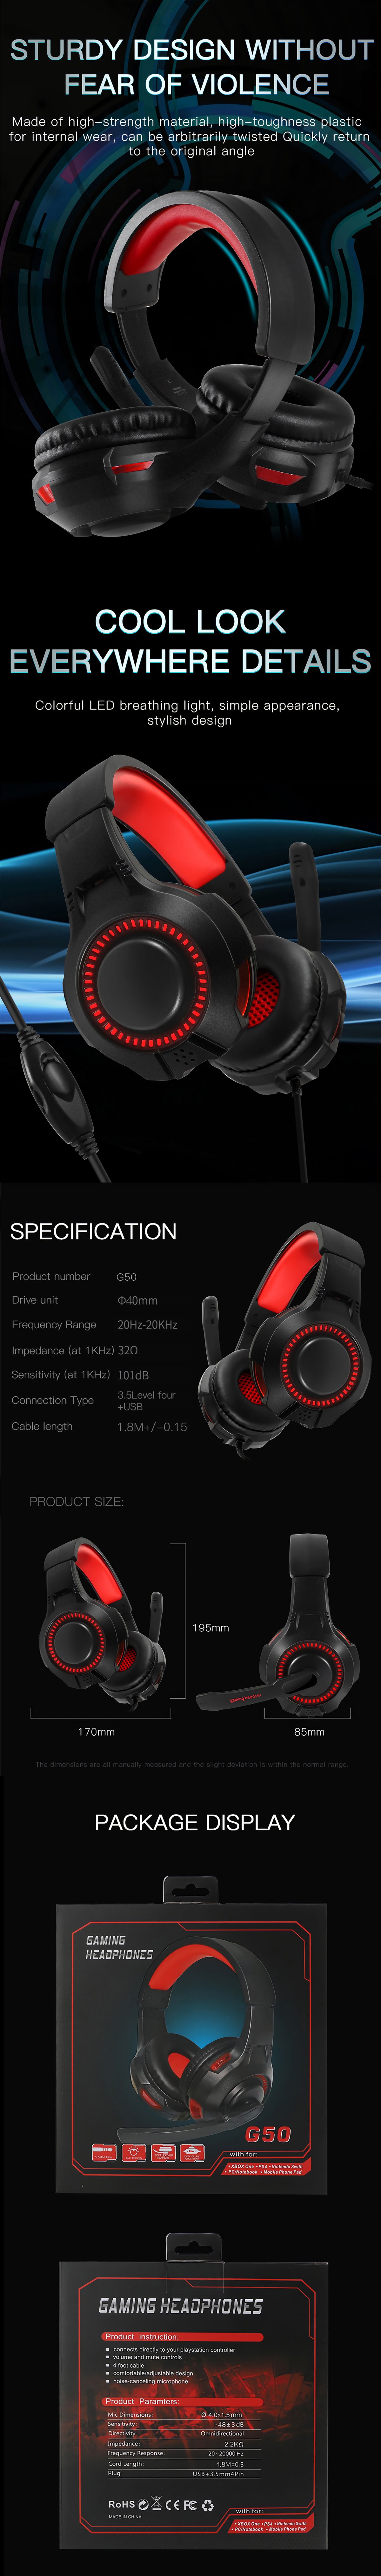 G50-Gaming-Headset-USB-35mm-Wired-Bass-Gaming-Headphone-Stereo-Surround-Sound-Video-Audio-Headphones-1676304